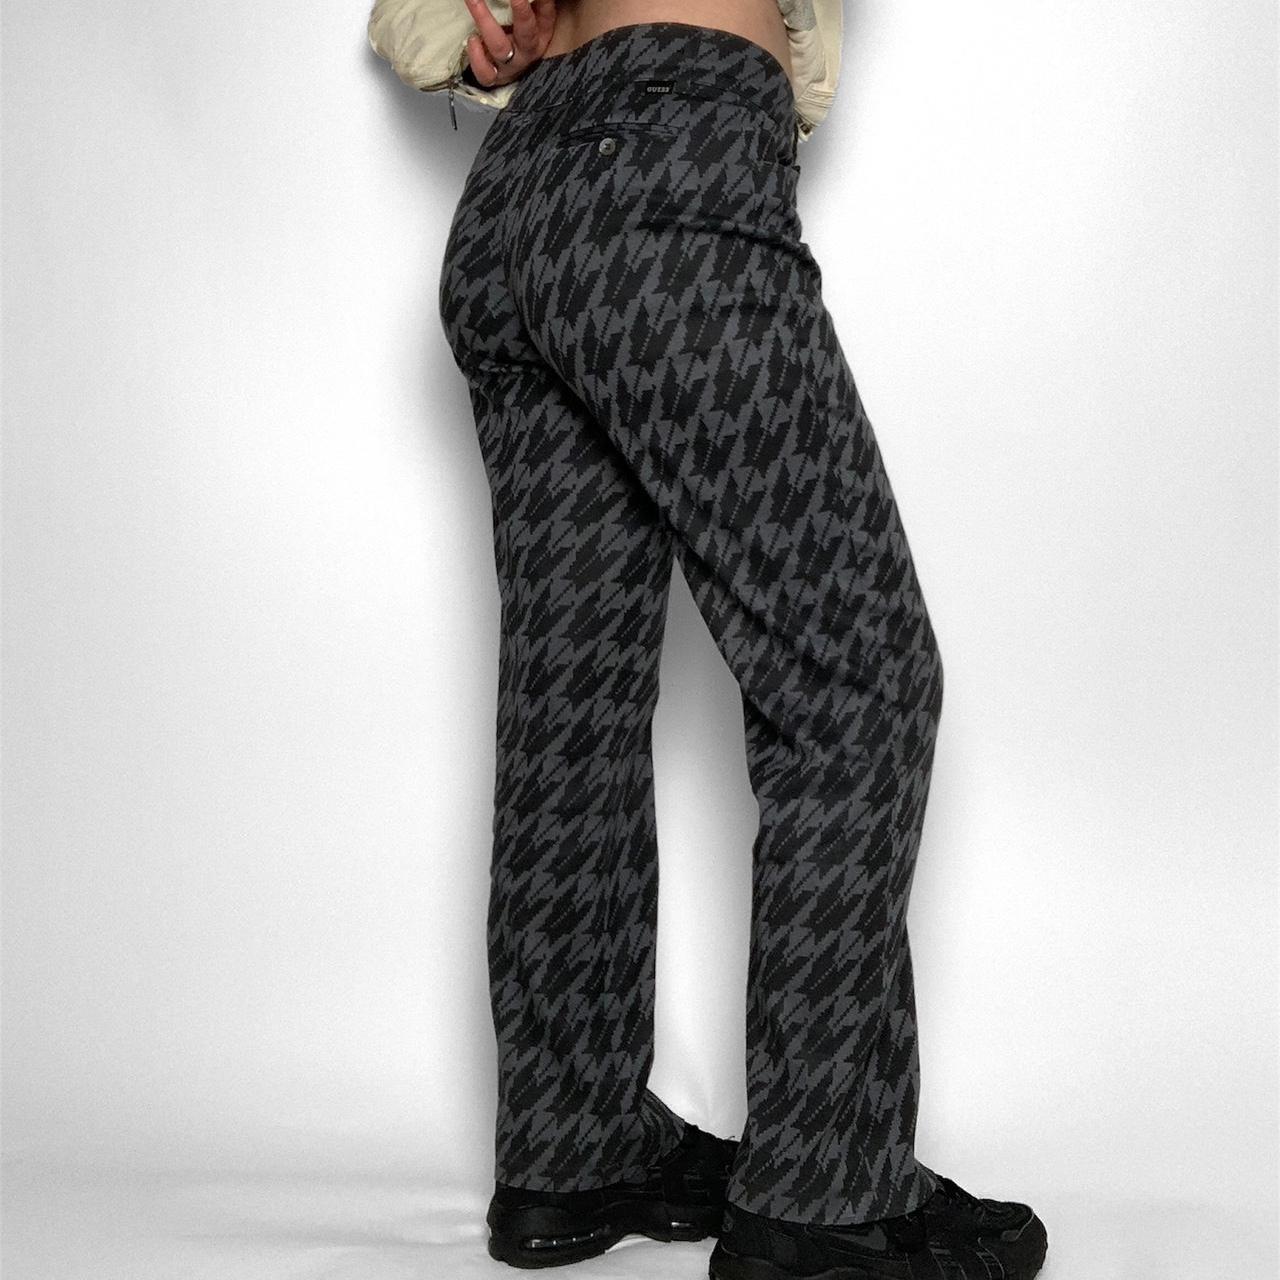 Guess vintage 90s flared dogtooth pattern trousers